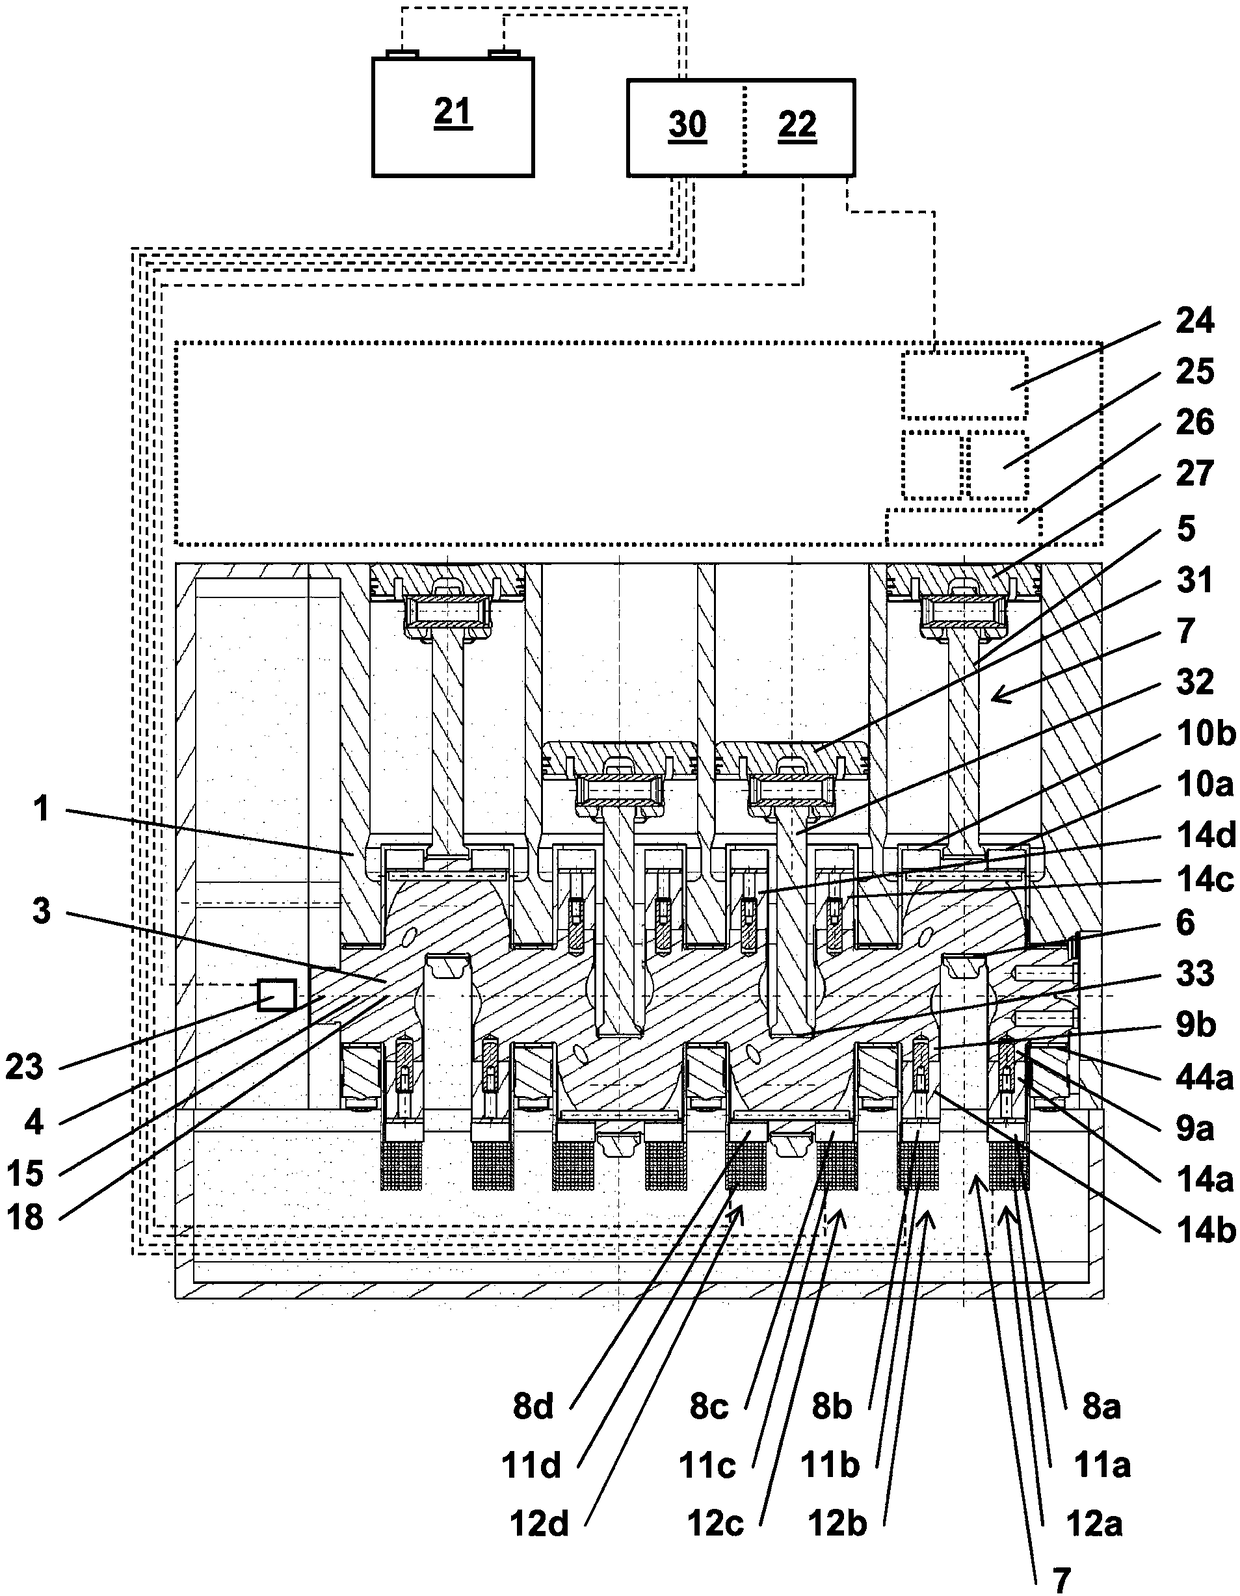 Systems with reciprocating piston engines